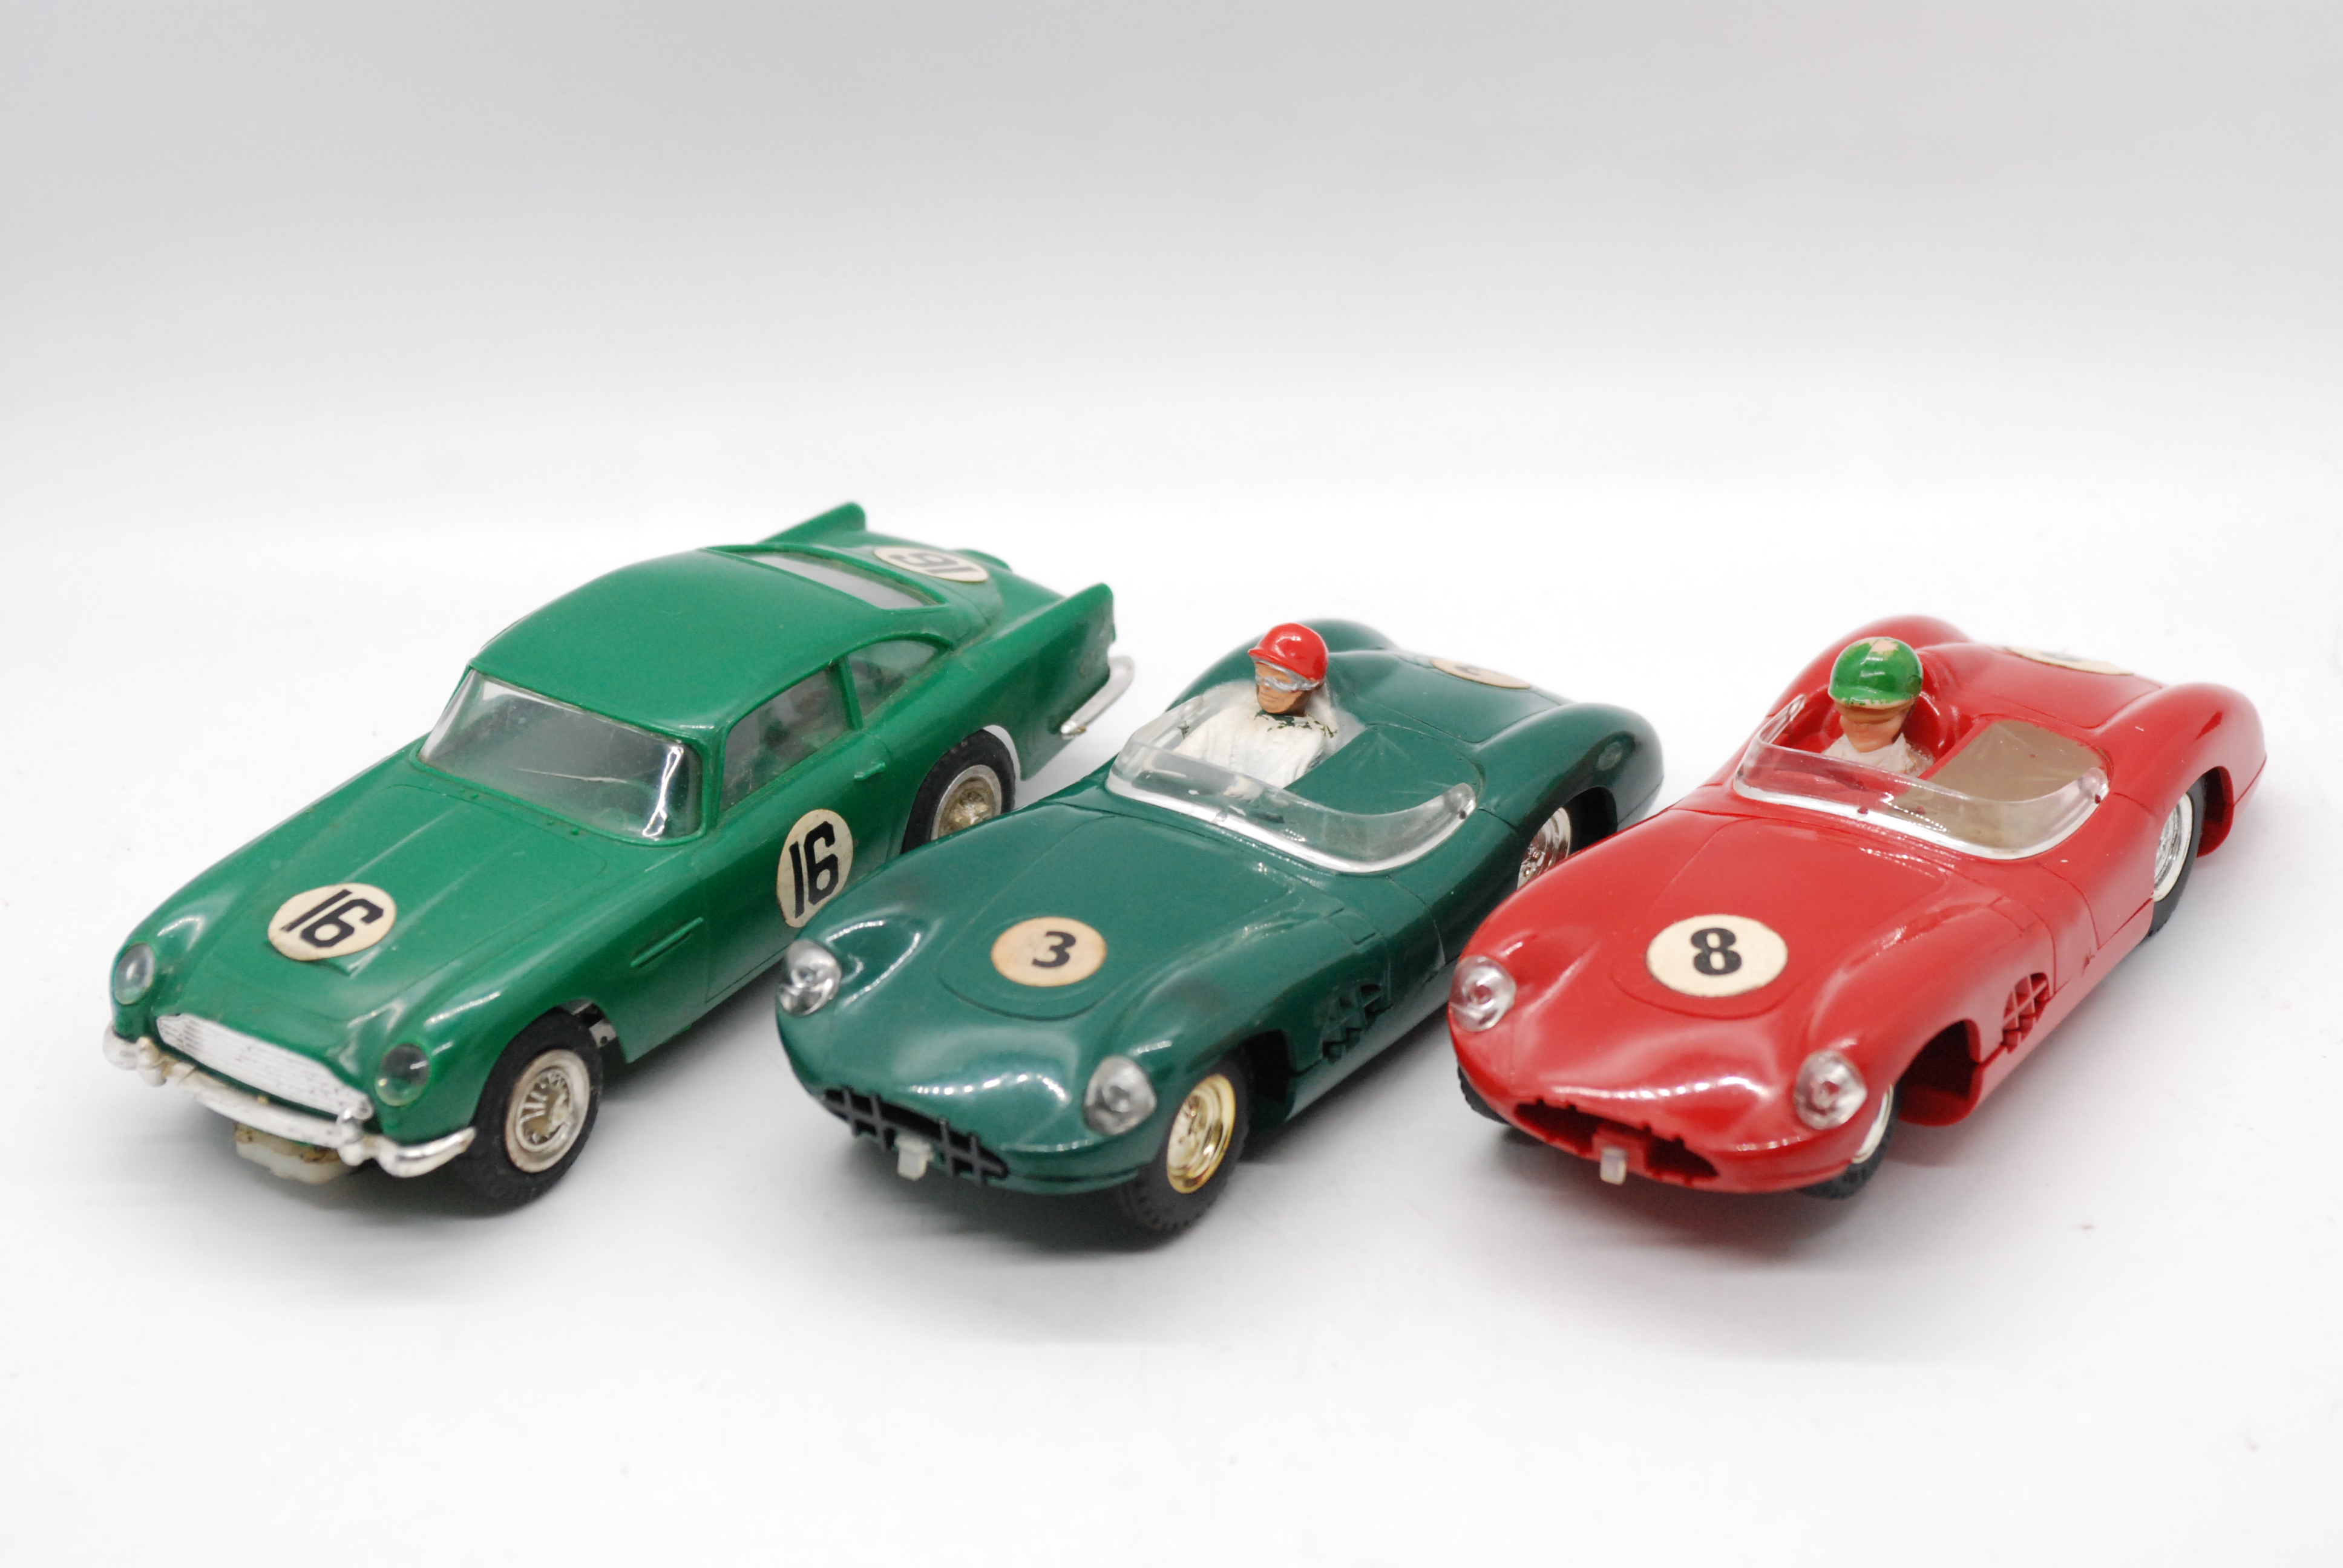 Scalextric, Revell - Three unboxed vintage Scalextric Aston Martin slot cars.